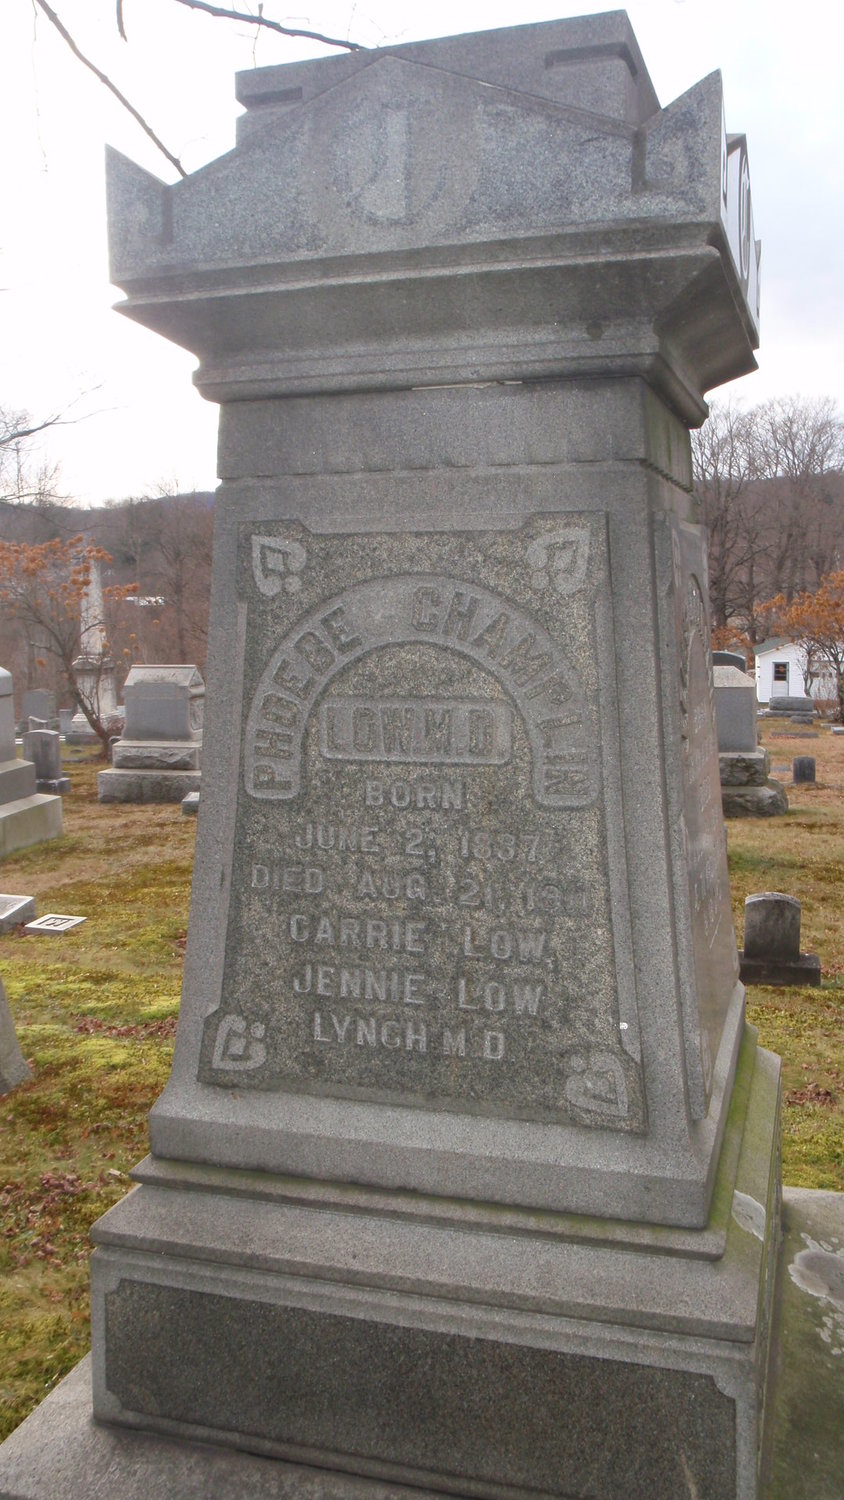 Dr. Phoebe Low’s gravestone/photo contributed by John Conway.